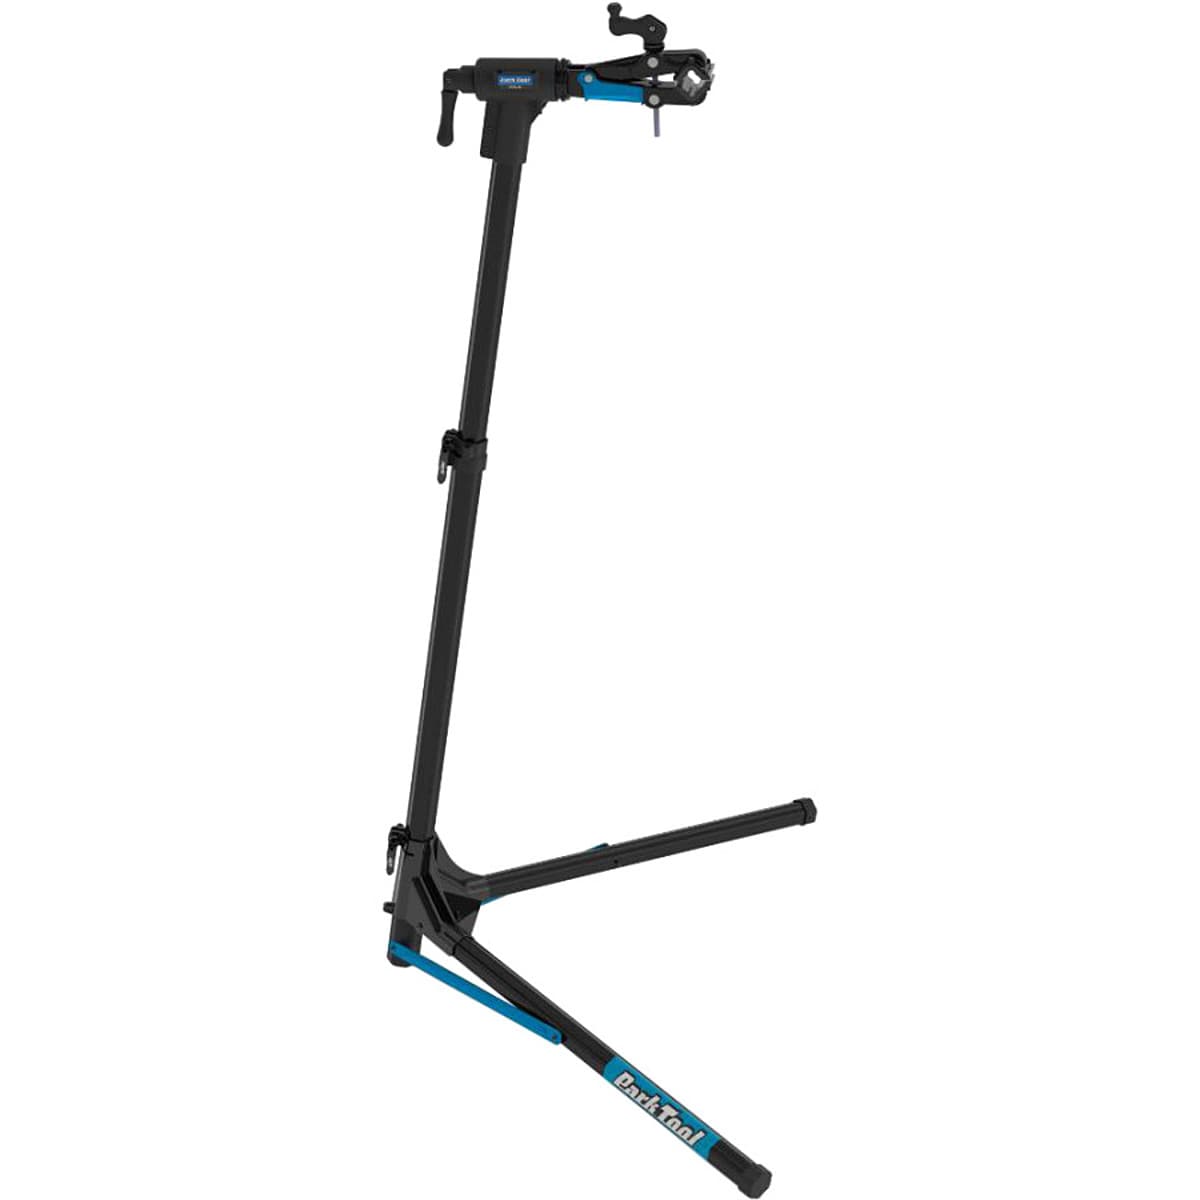 Park Tool PRS-25 Team Issue Portable Repair Stand